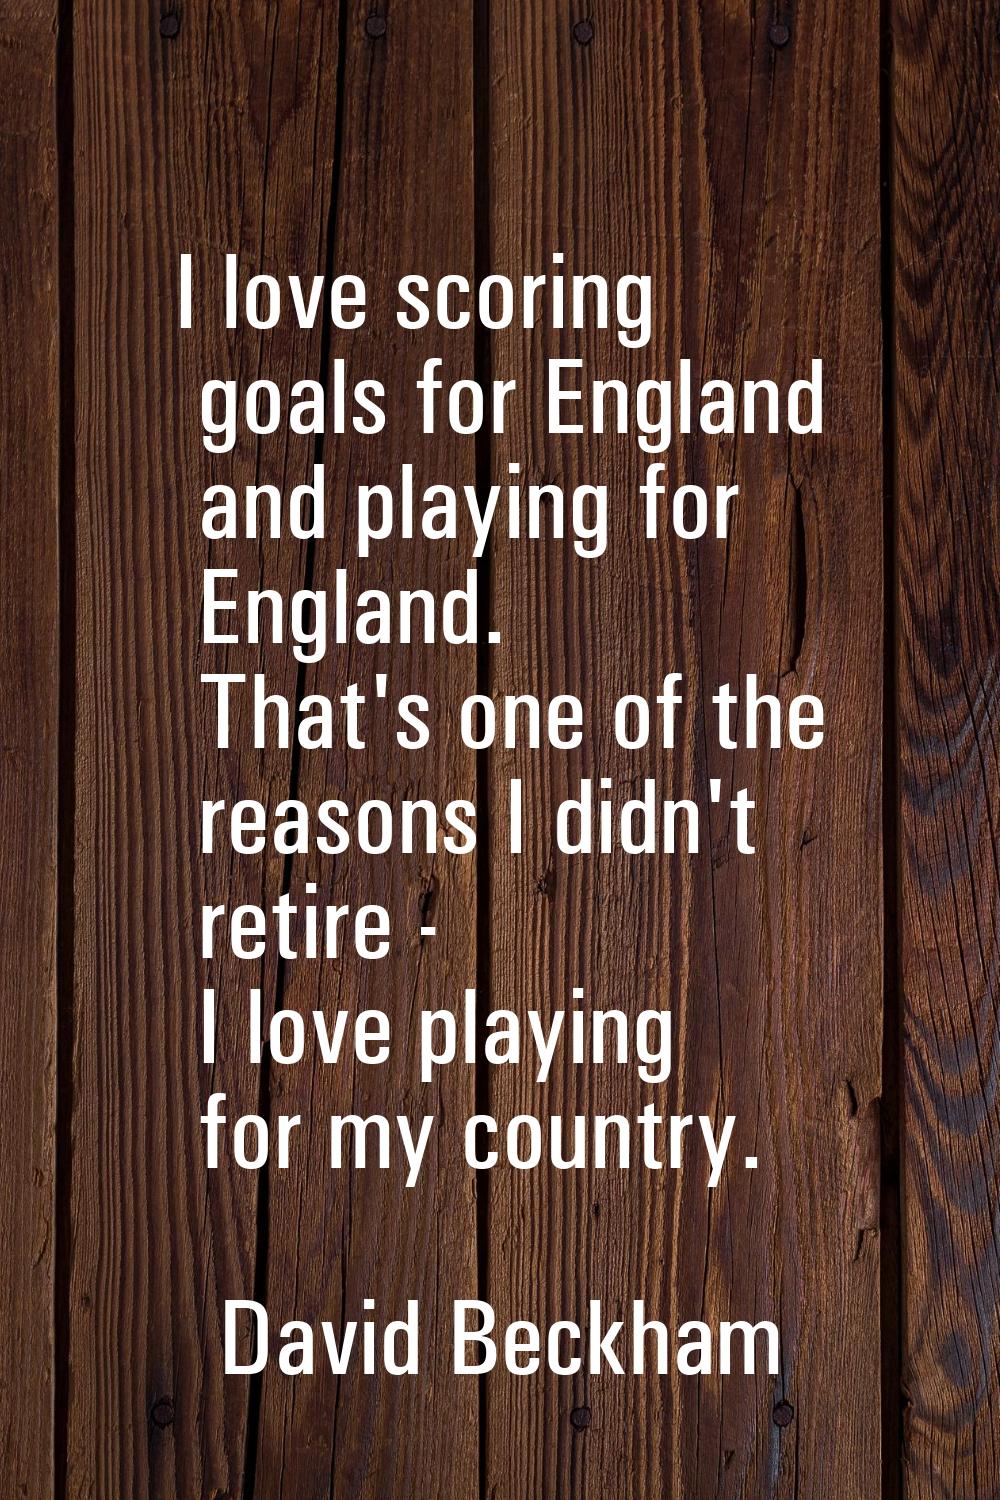 I love scoring goals for England and playing for England. That's one of the reasons I didn't retire